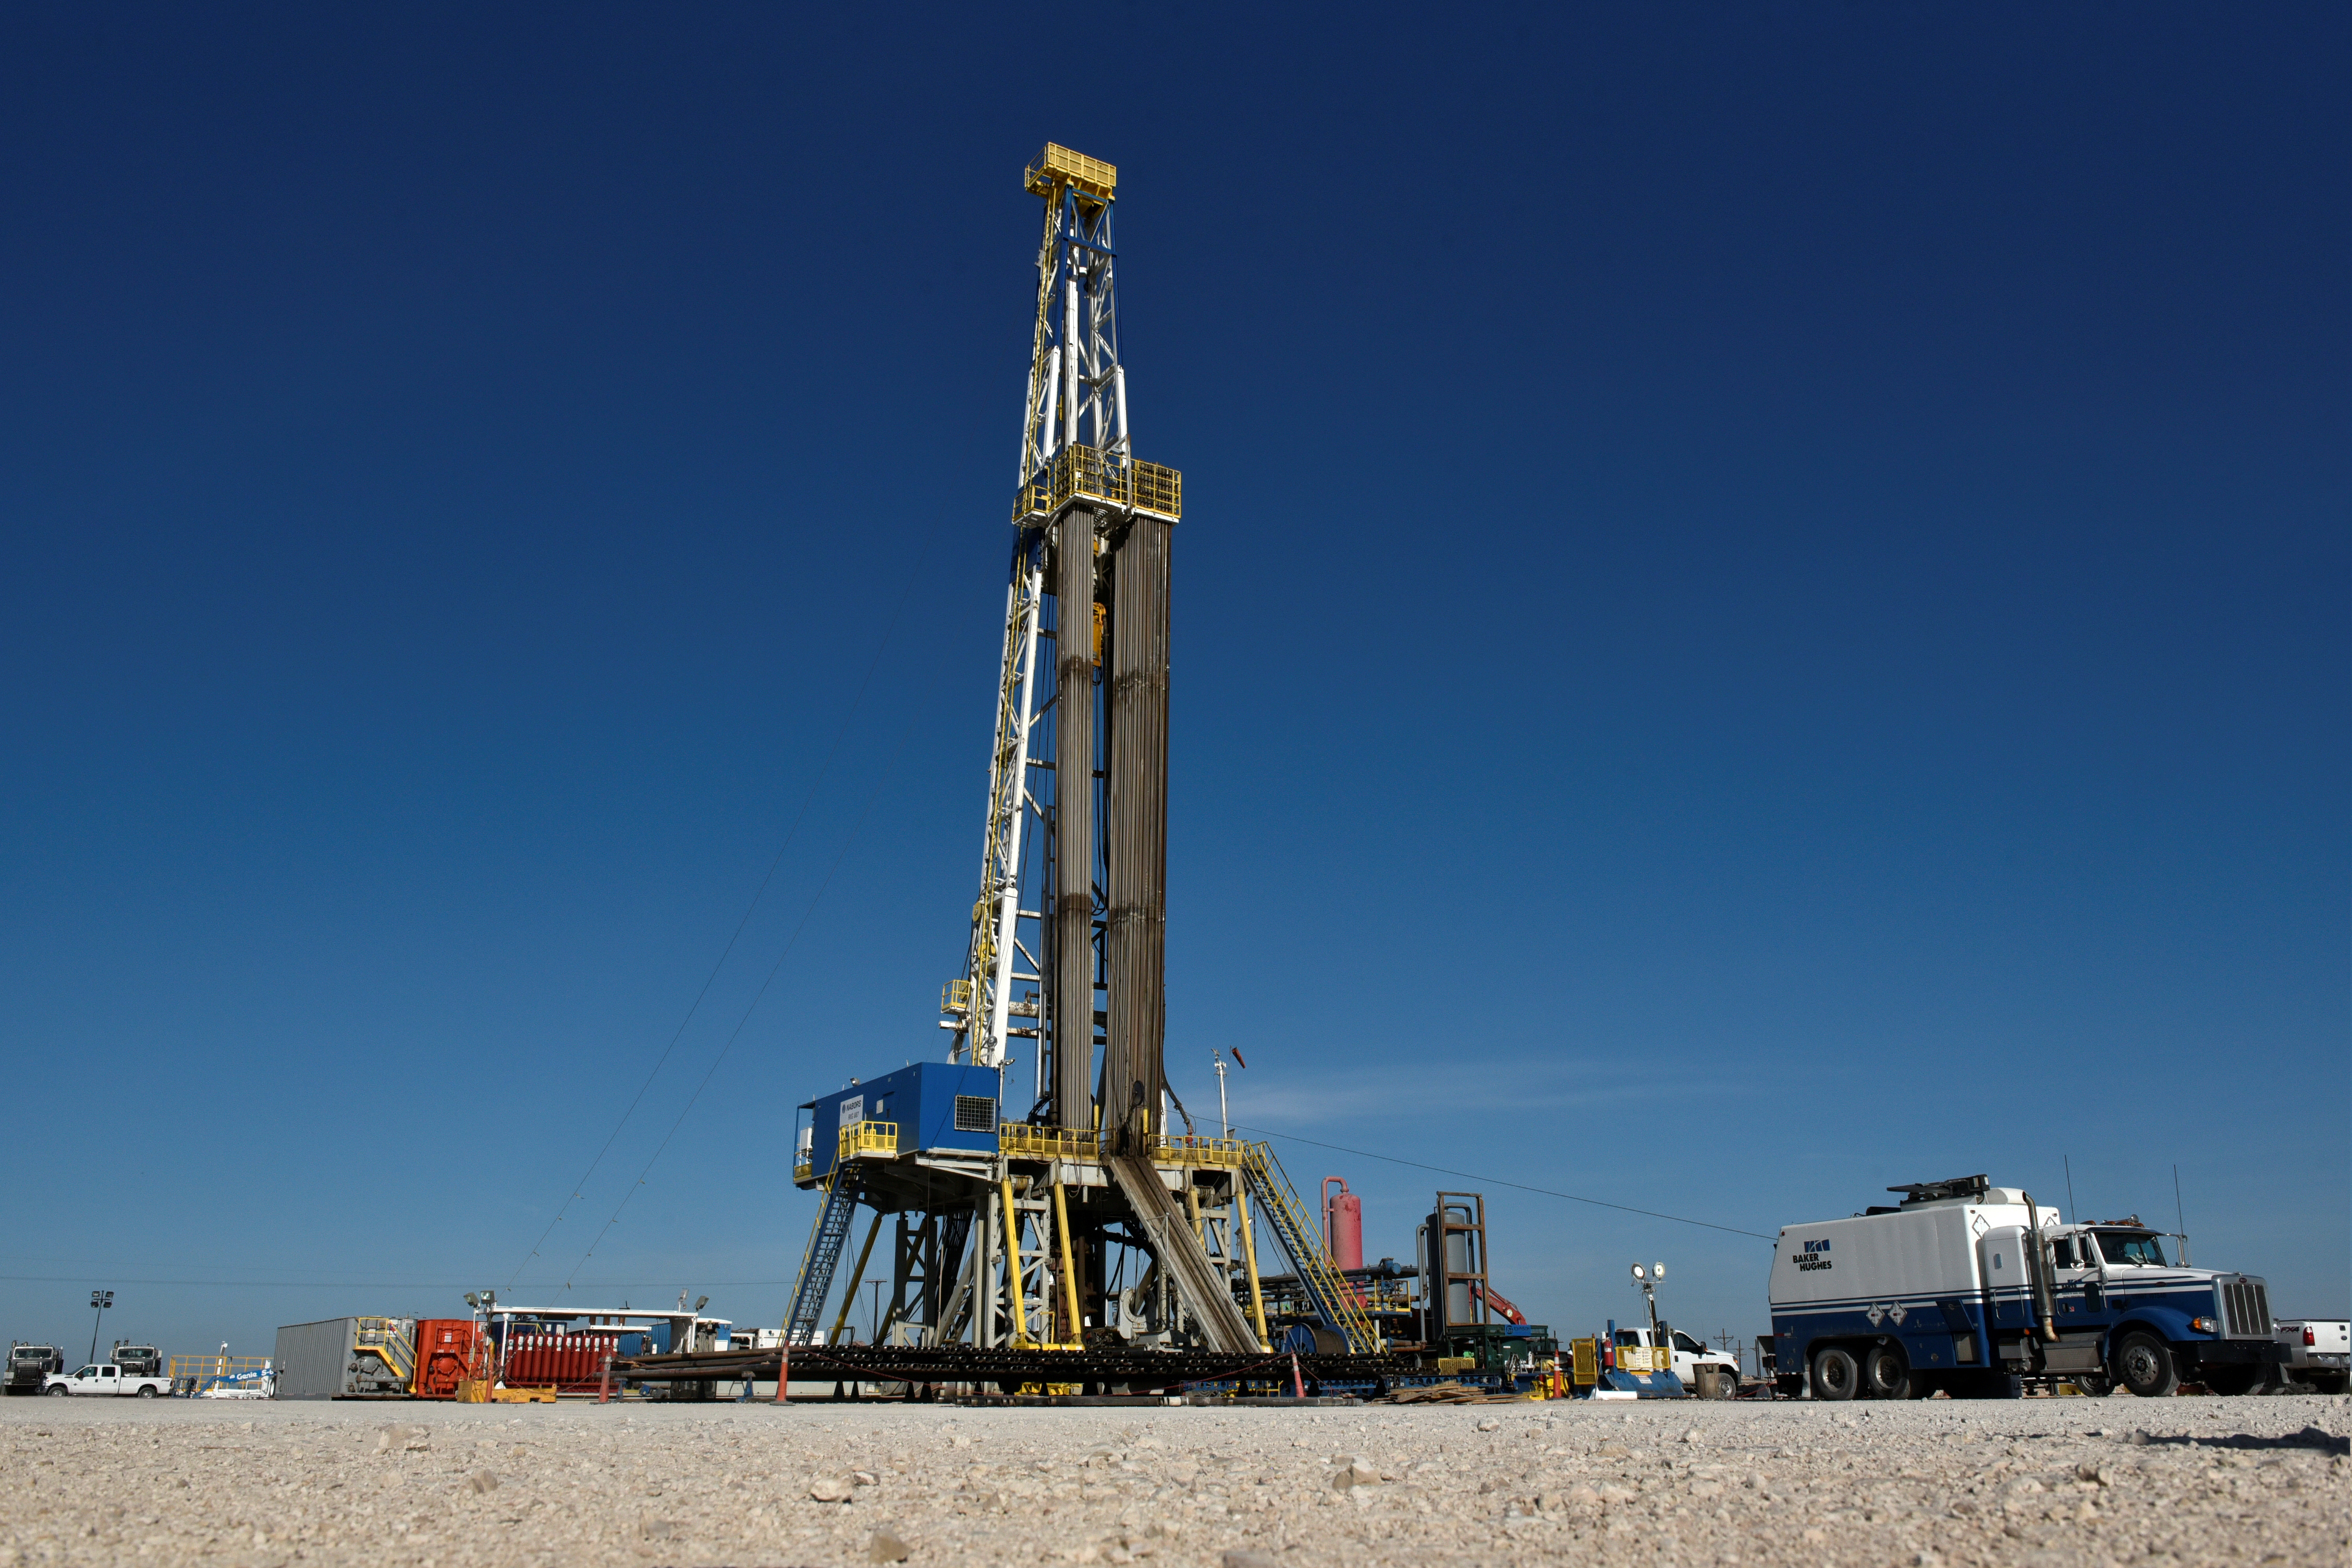 A drilling rig on a lease owned by Oasis Petroleum performs logging operations in the Permian Basin near Wink